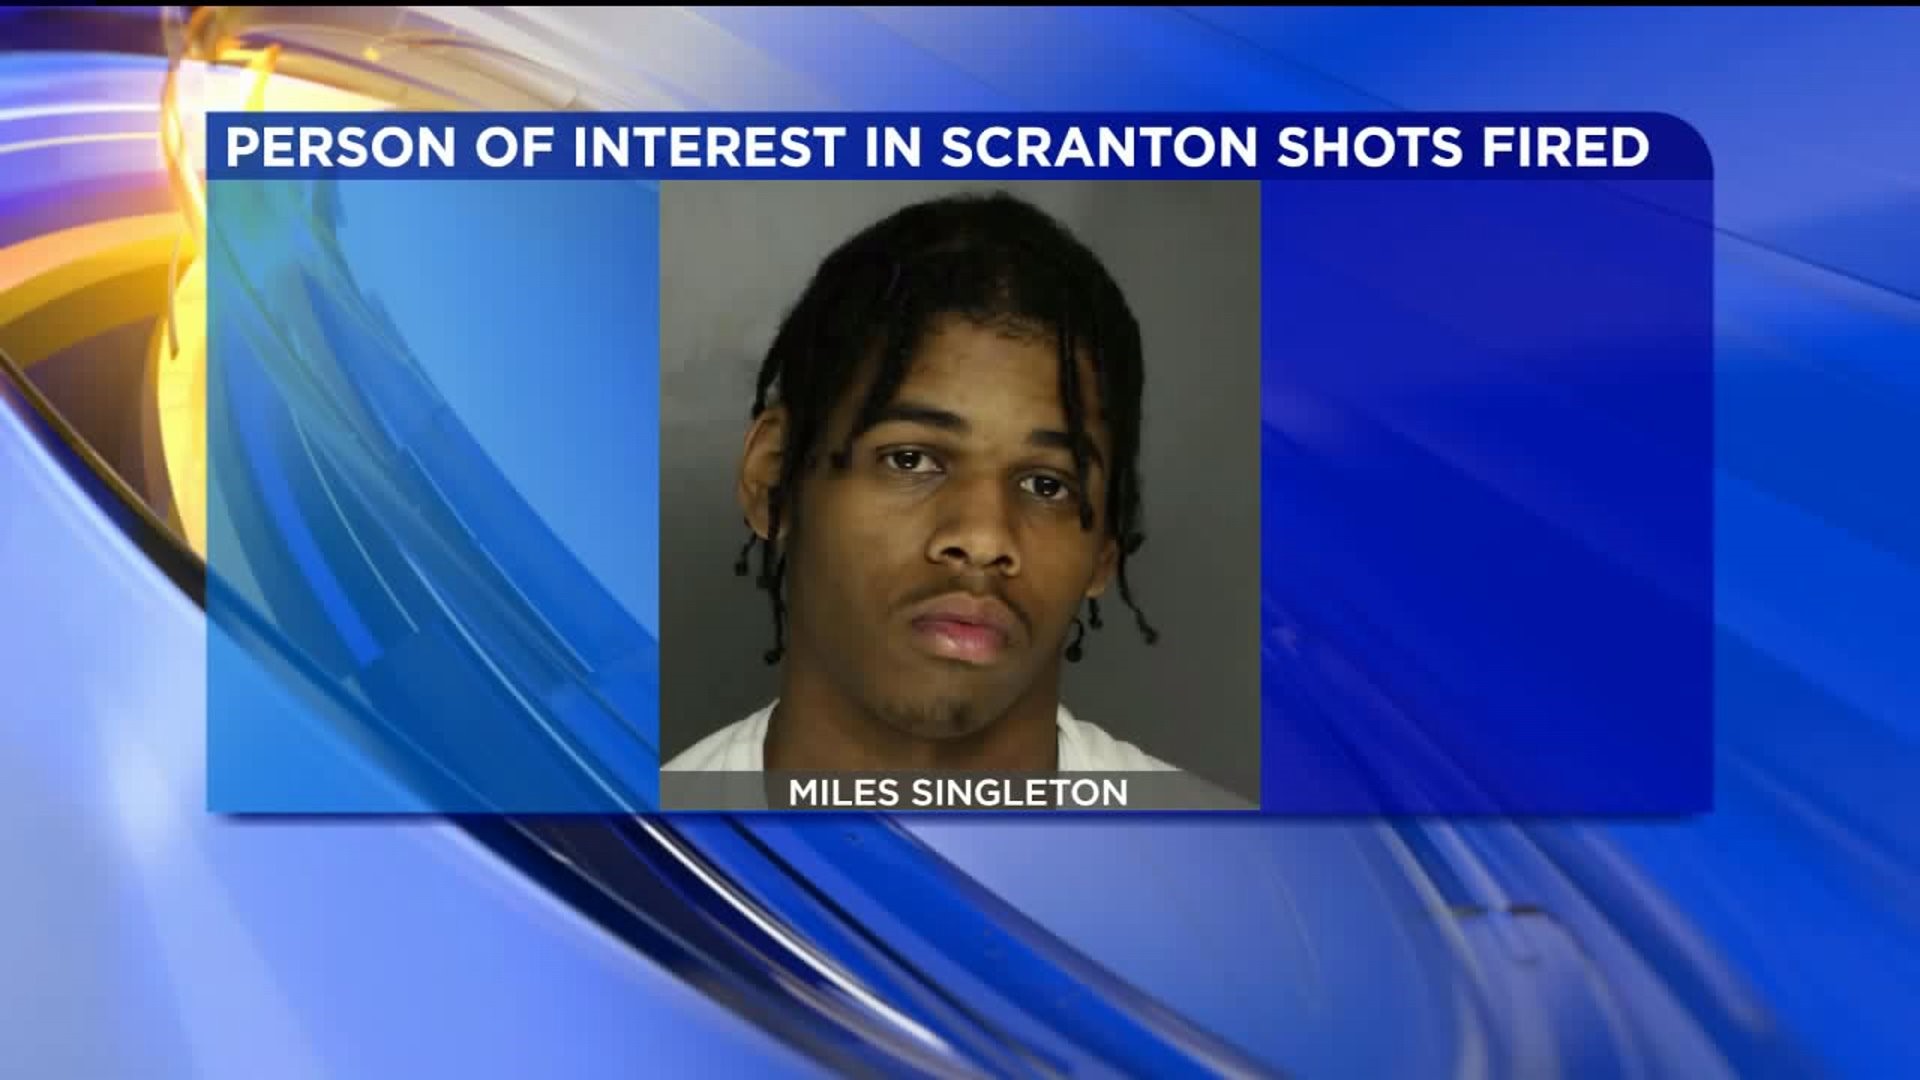 Police Search for Person of Interest after Shots Fired in Scranton